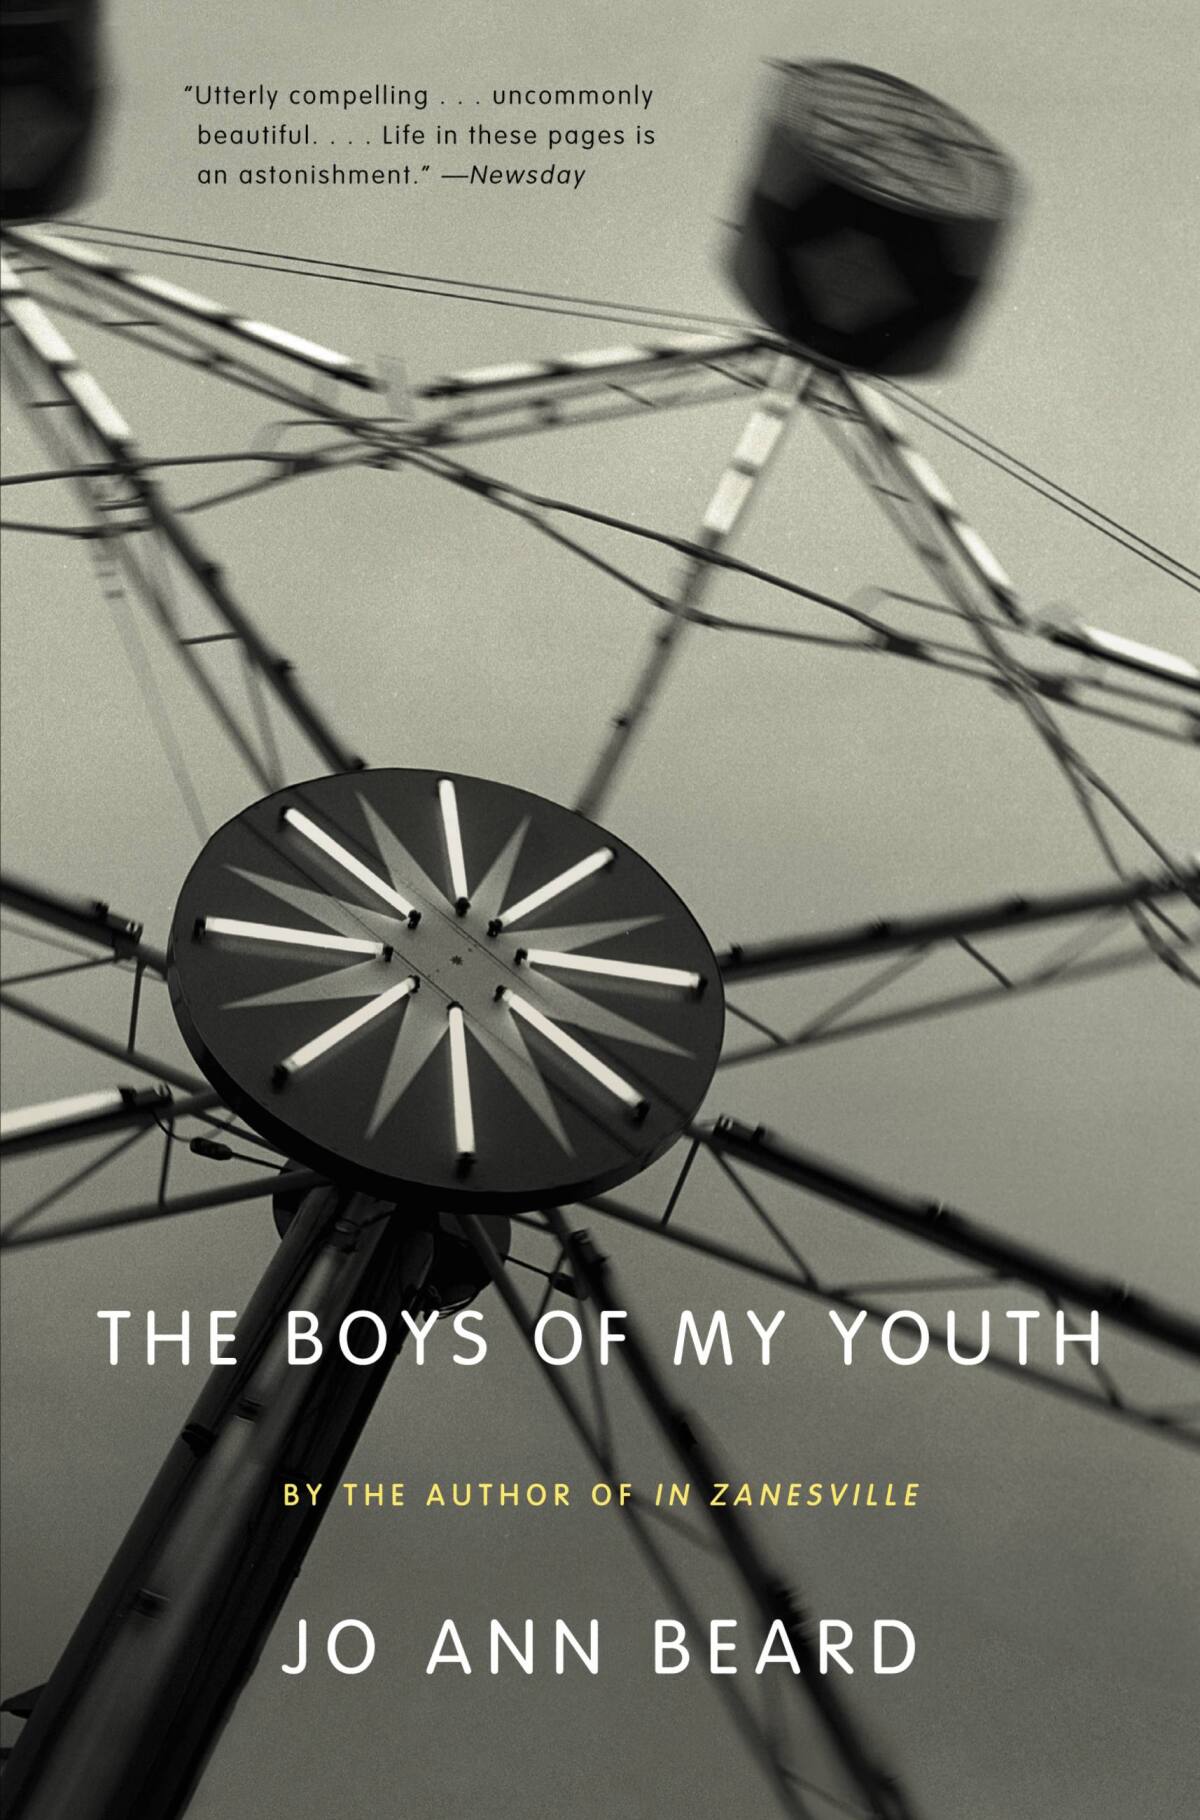 "The Boys of My Youth," Jo Ann Beard's influential first collection of essays.